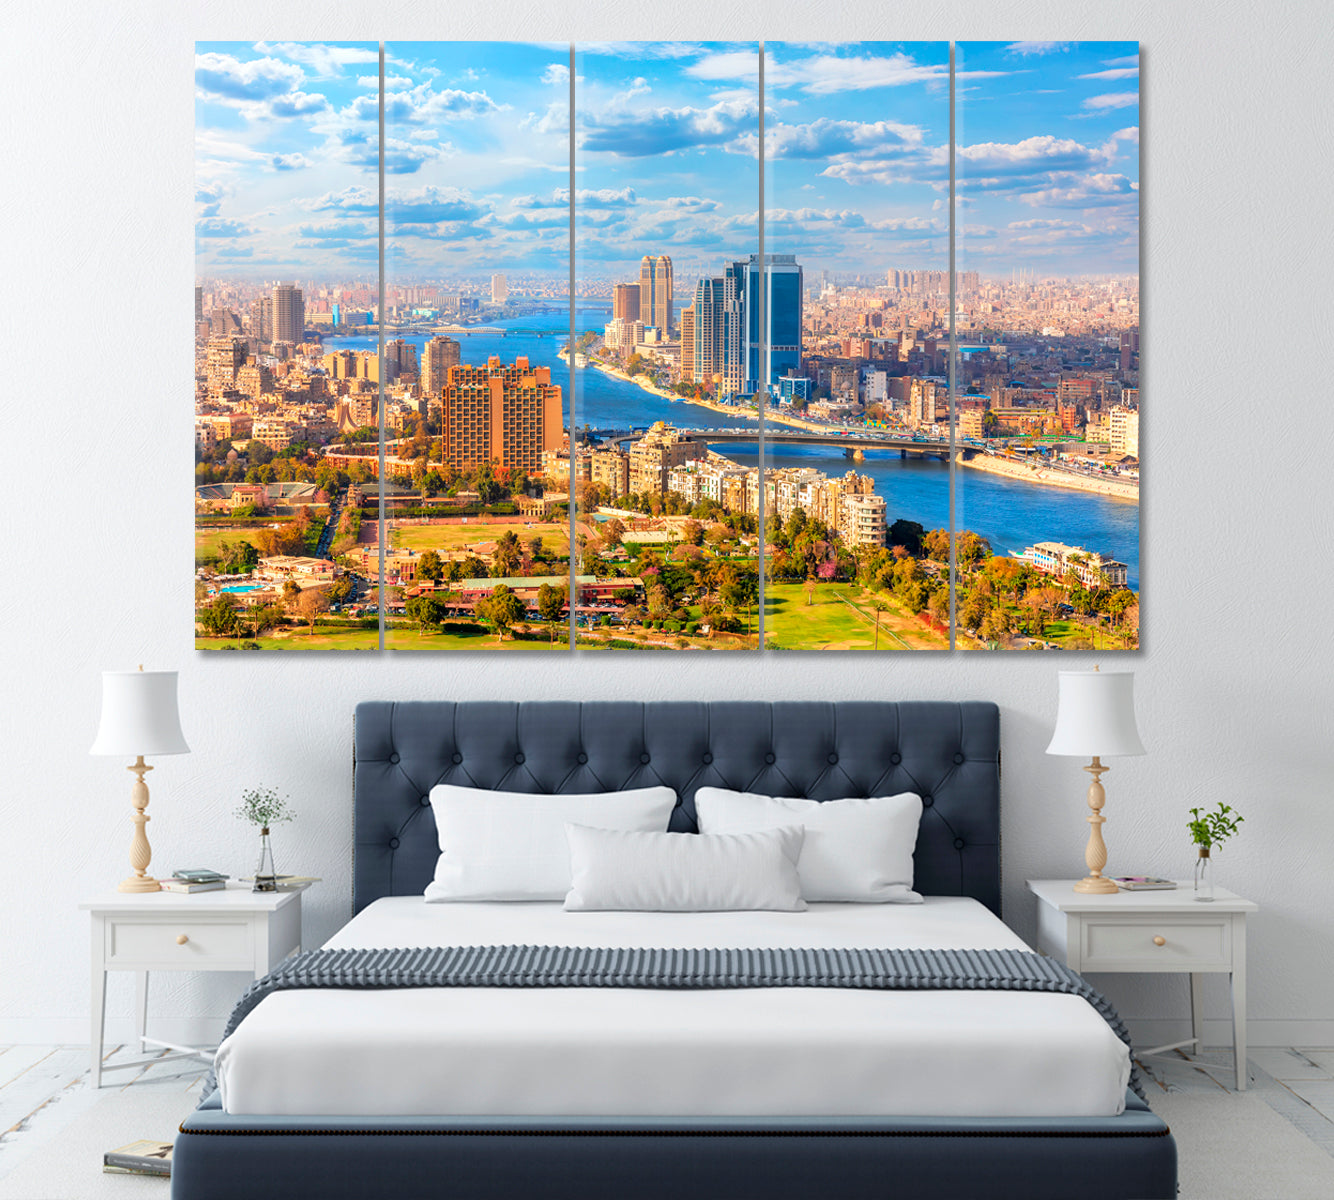 Cairo and Nile Egypt Canvas Print ArtLexy 5 Panels 36"x24" inches 